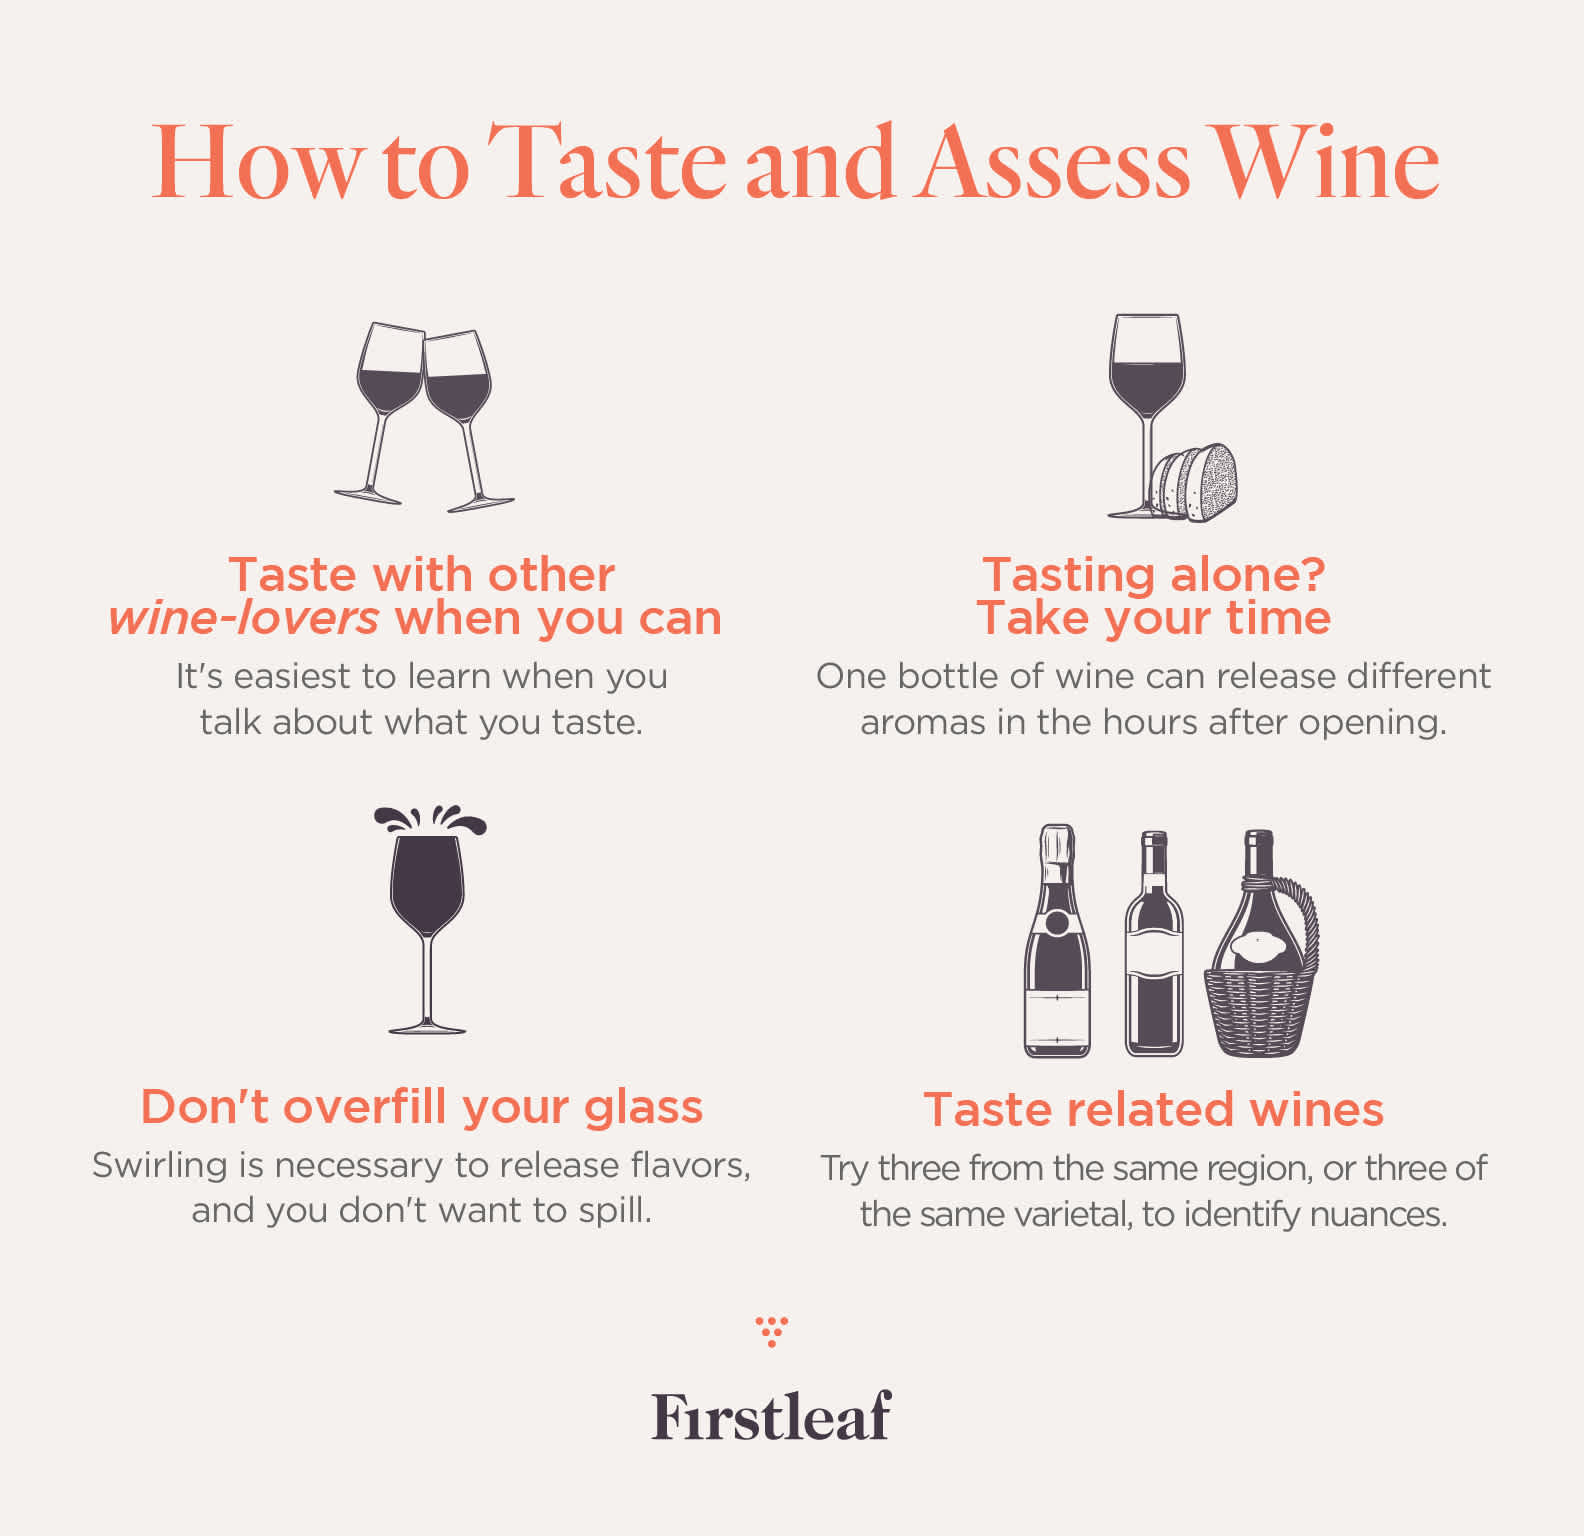 Six Tips for a Successful Wine Tasting  Wine Sampling Tips and Tricks -  Cellaraiders